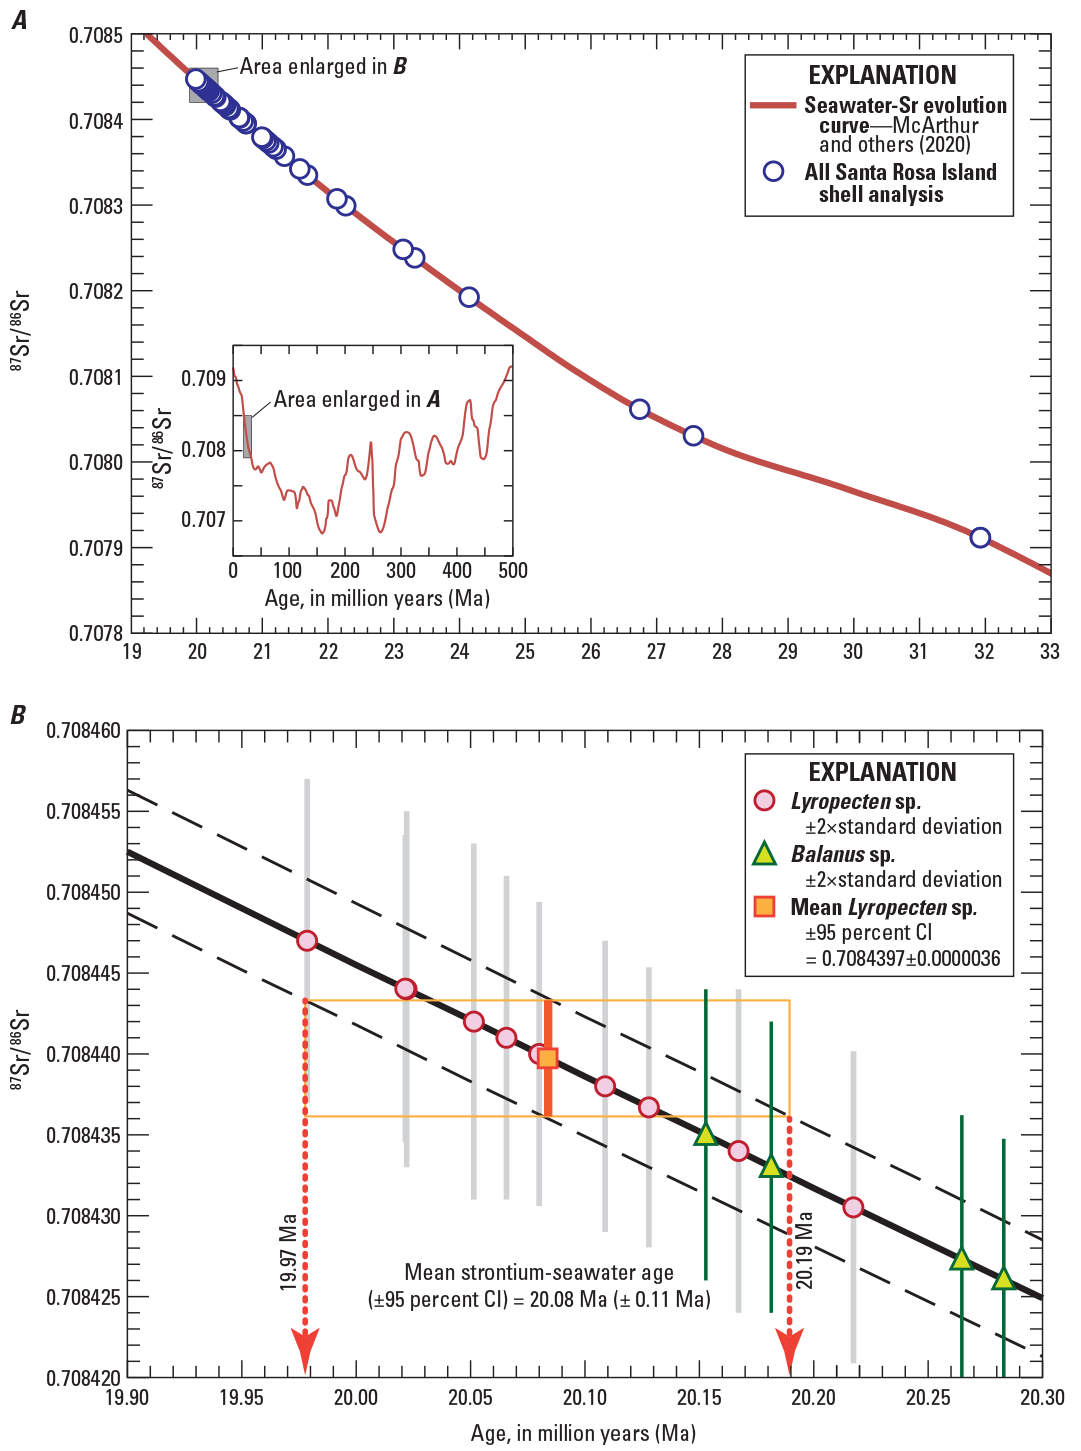 Strontium isotope ratio versus age showing the seawater strontium evolution curve
                           for all data, and for analyses with the least altered compositions.